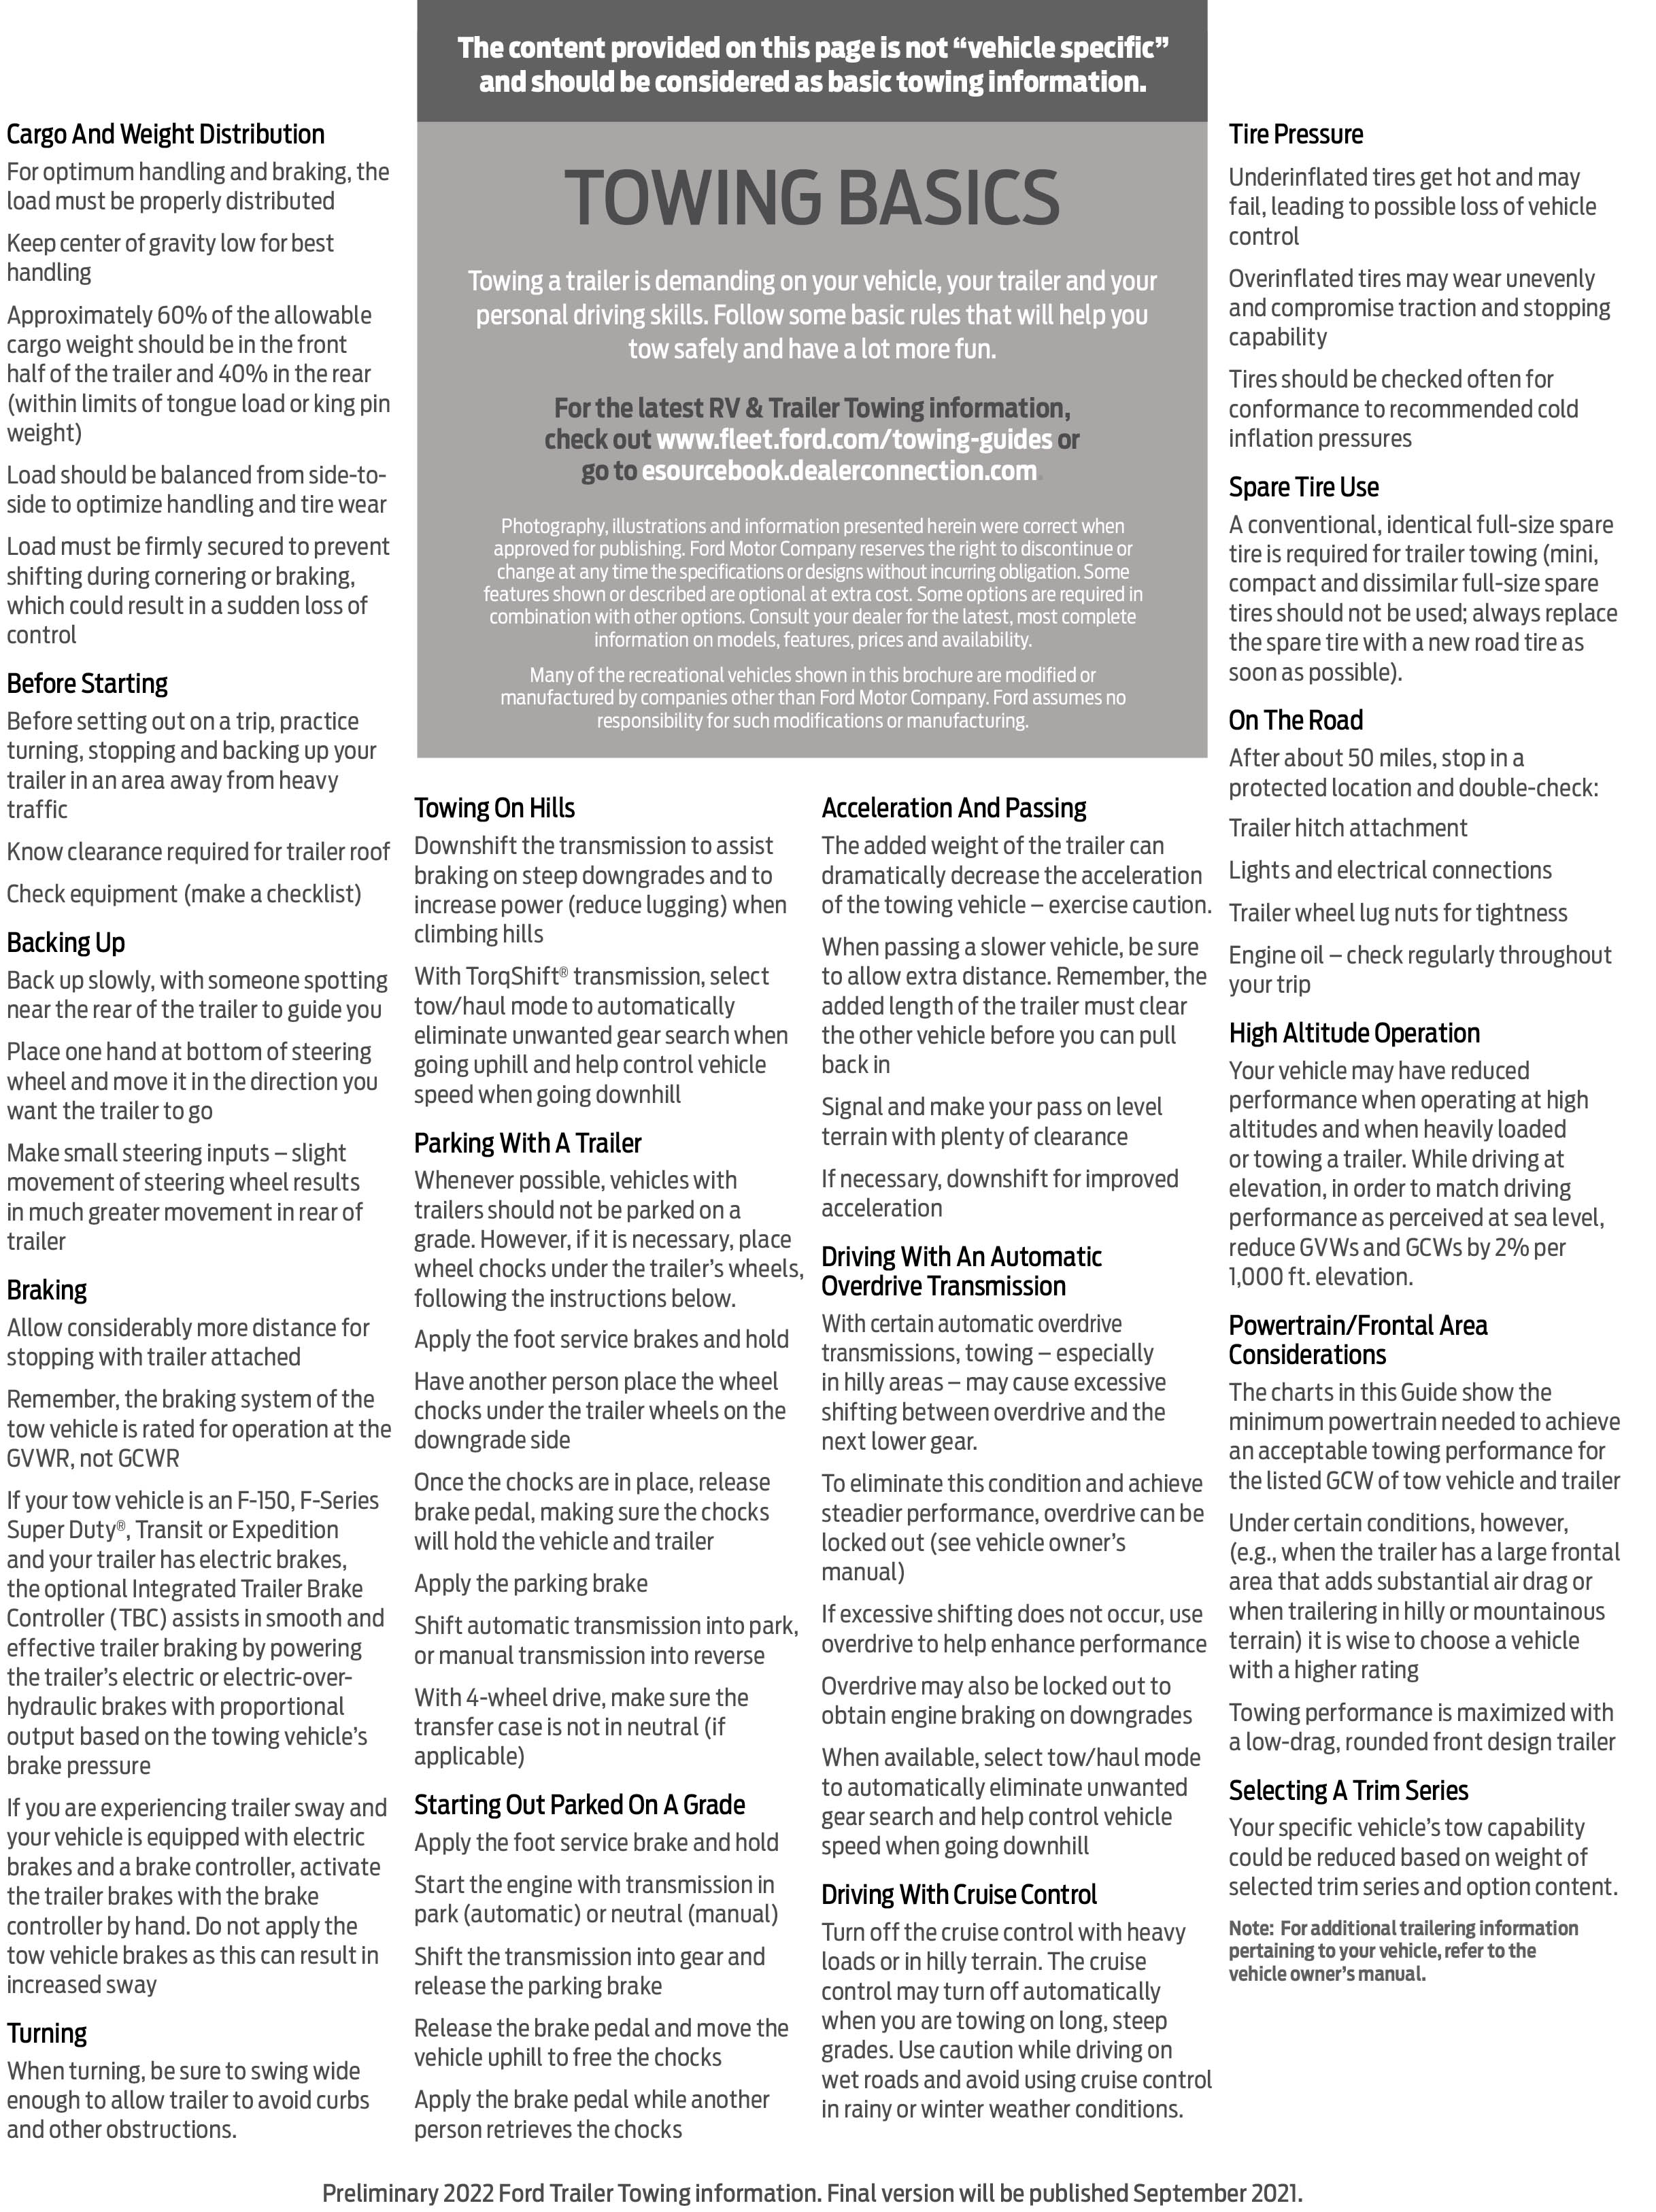 maverick rv towing guide page 2